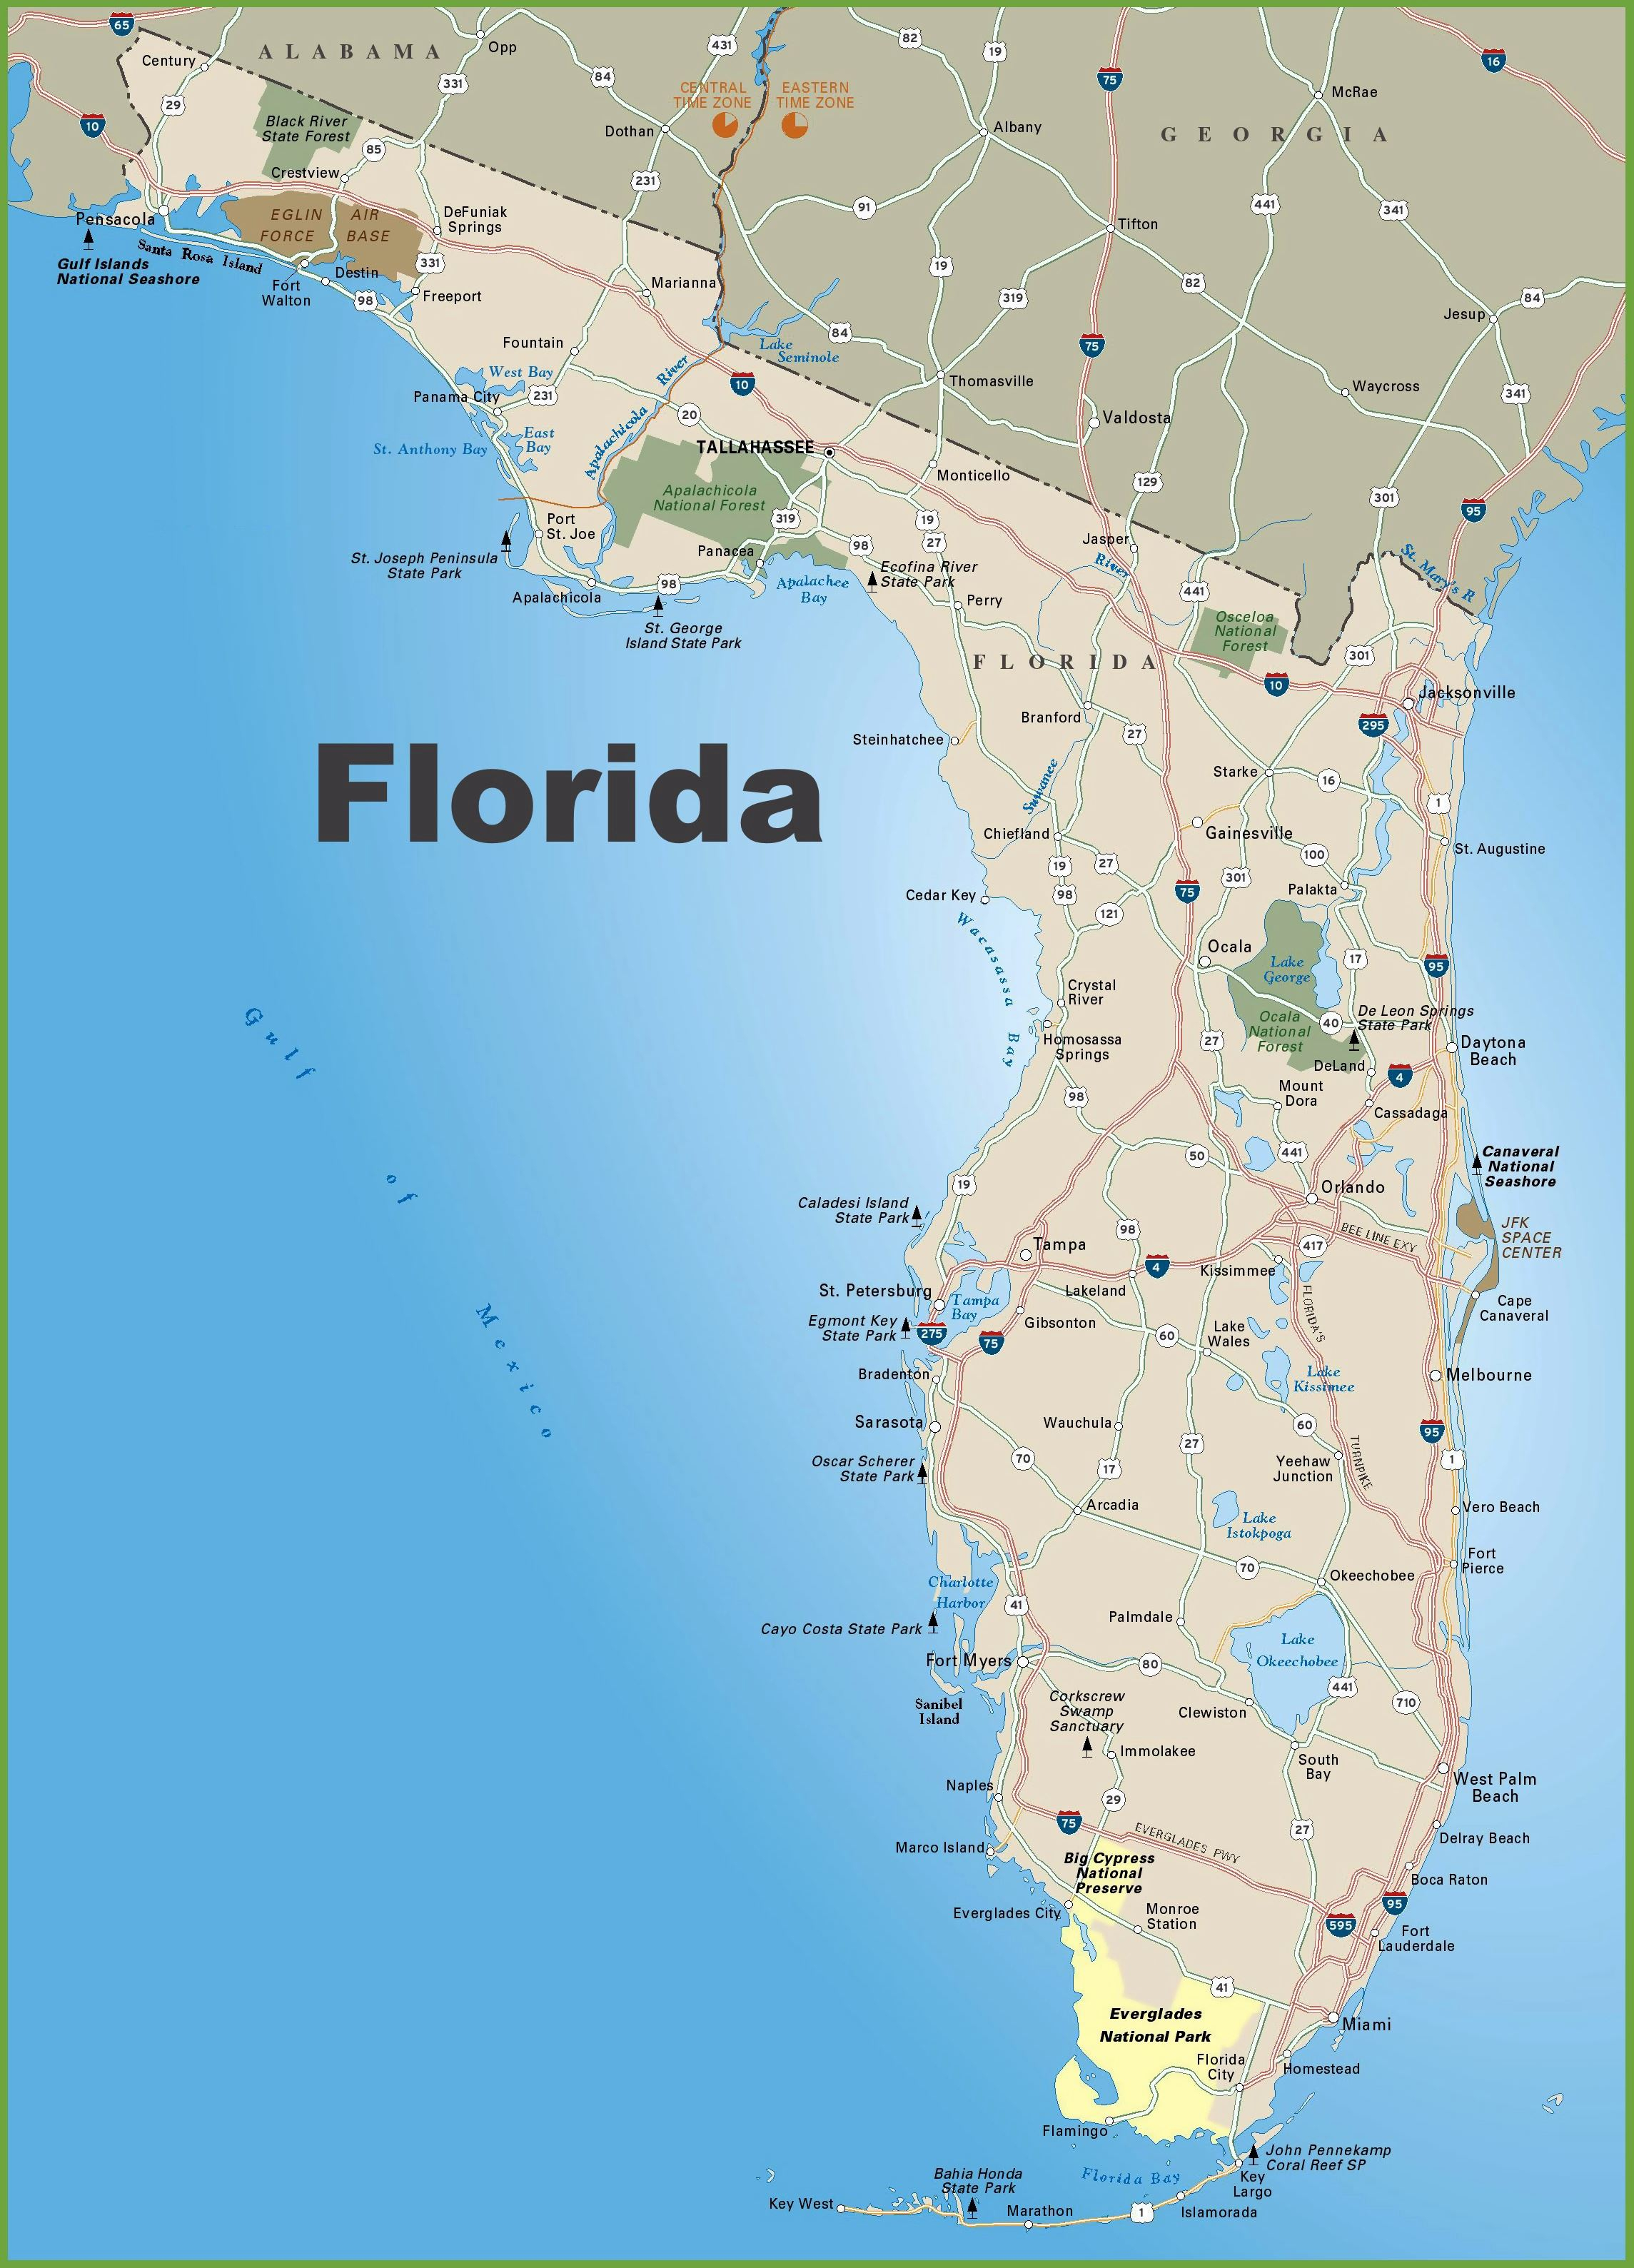 Large Florida Maps For Free Download And Print | High-Resolution And - Orange Beach Florida Map